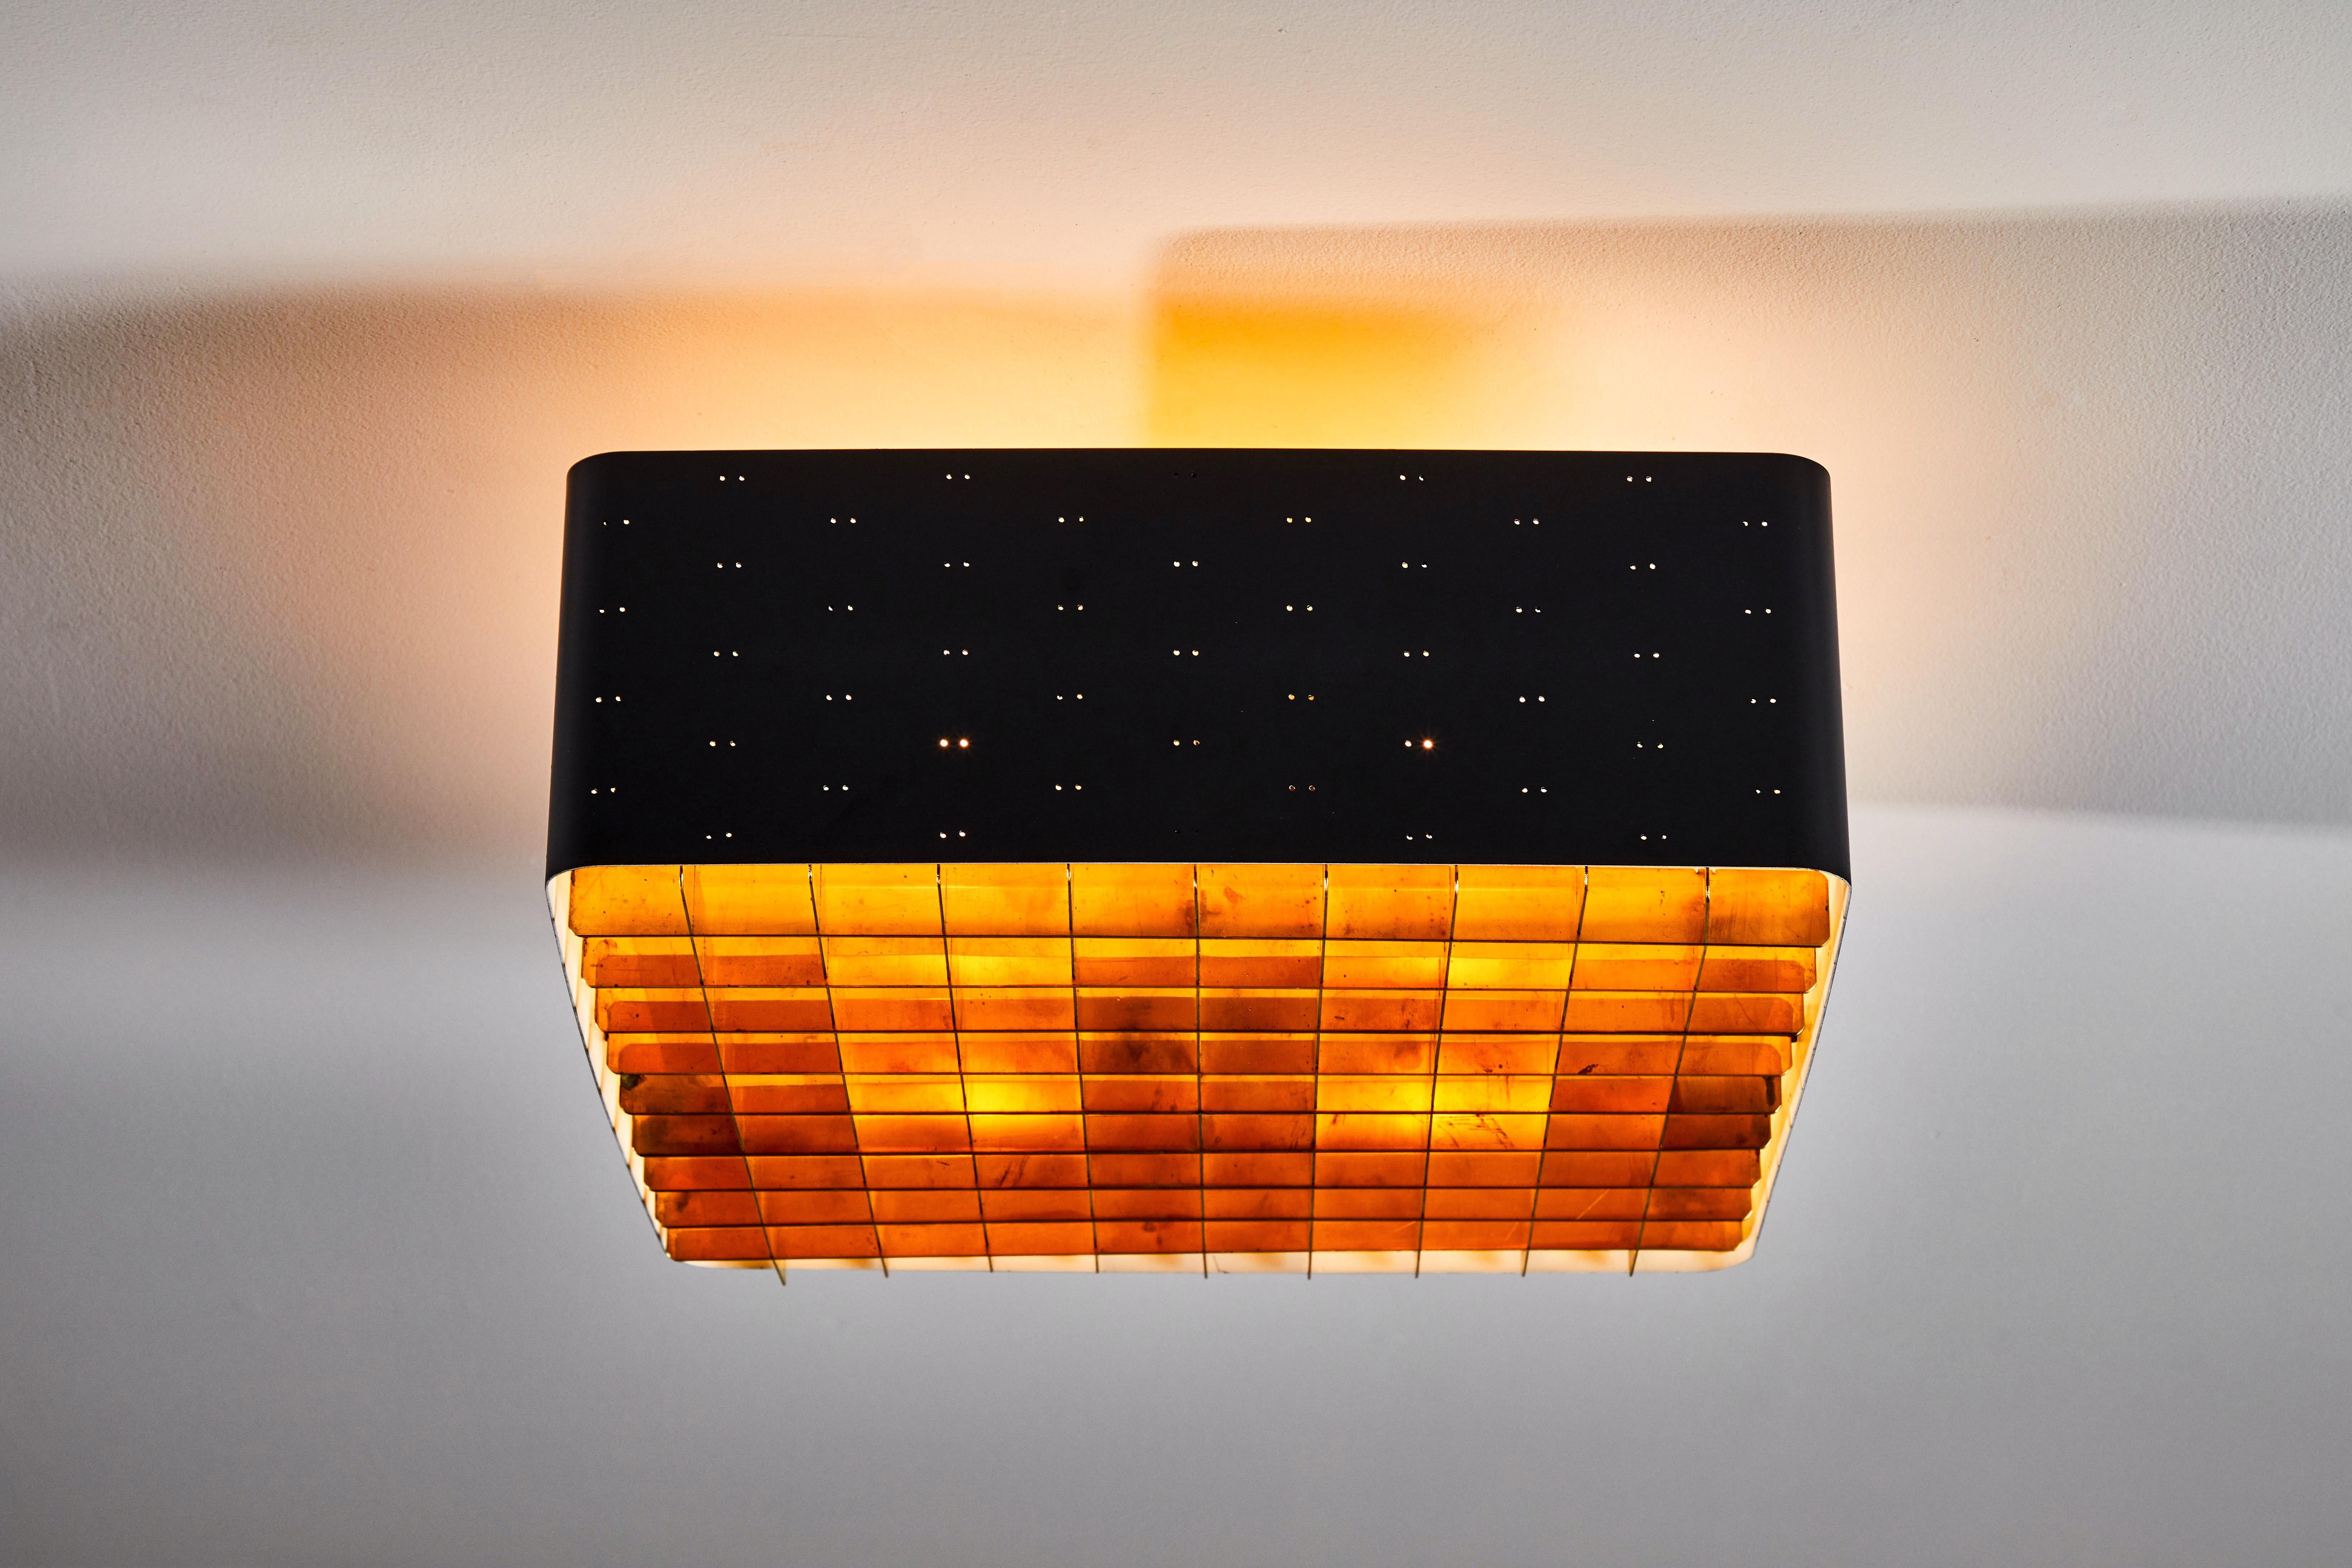 SIngle model 9068 starry sky flush mount ceiling light by Paavo Tynell for Taito Oy. Manufactured in Finland, circa 1950s. Enameled, perforated metal, brass, glass. Rewired for US junction boxes. Takes four E27 40w maximum bulbs.
  